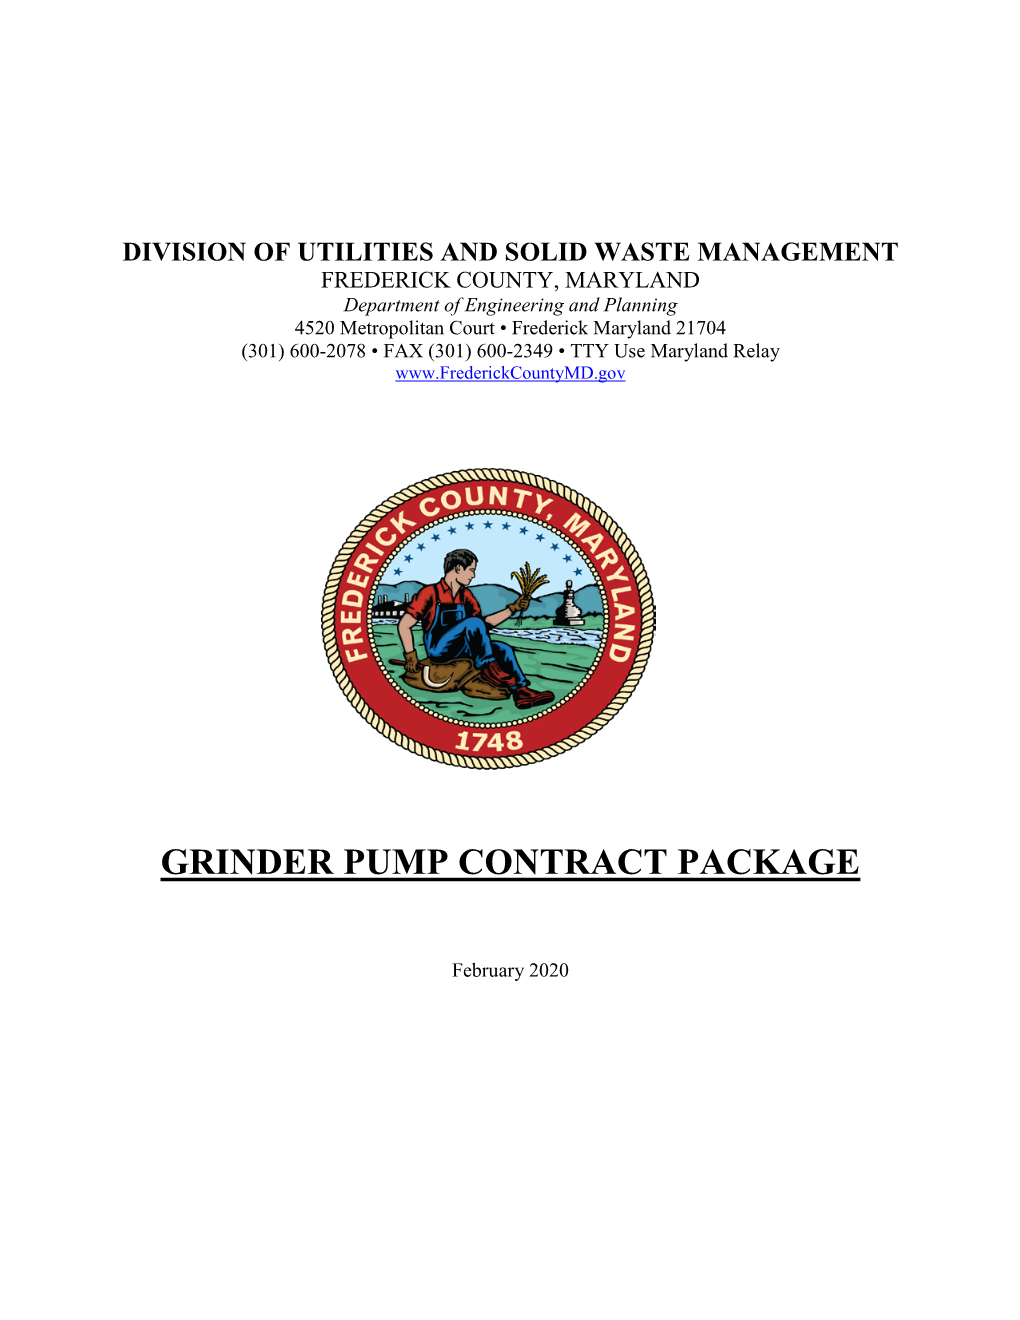 Grinder Pump Contract Package